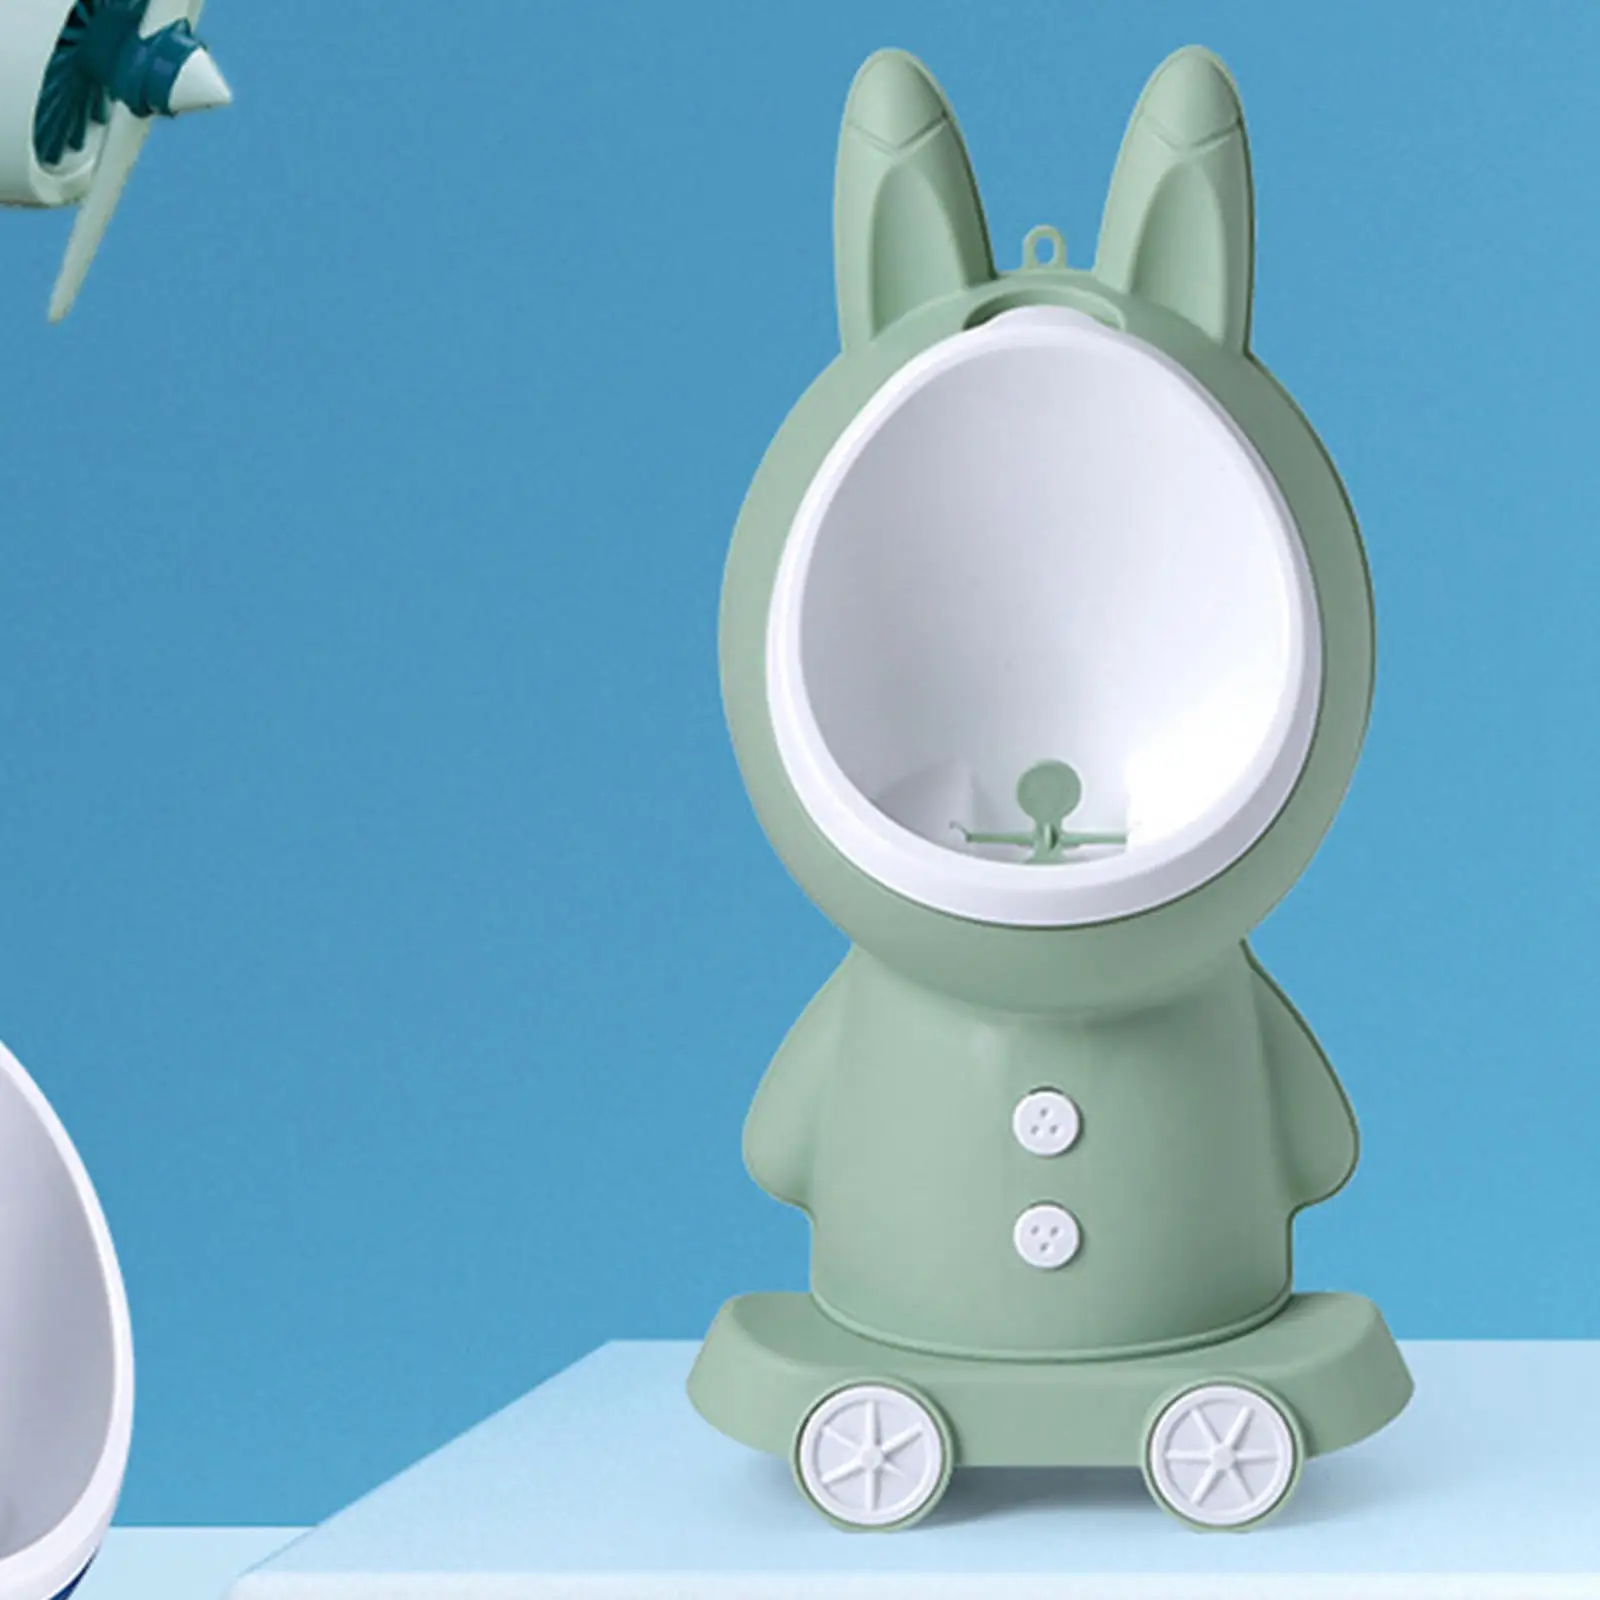 Portable RabbitPee Toilet Kids Children Standing Potty Urinal Wall Mounted Kids Baby Removable Bowl Insert